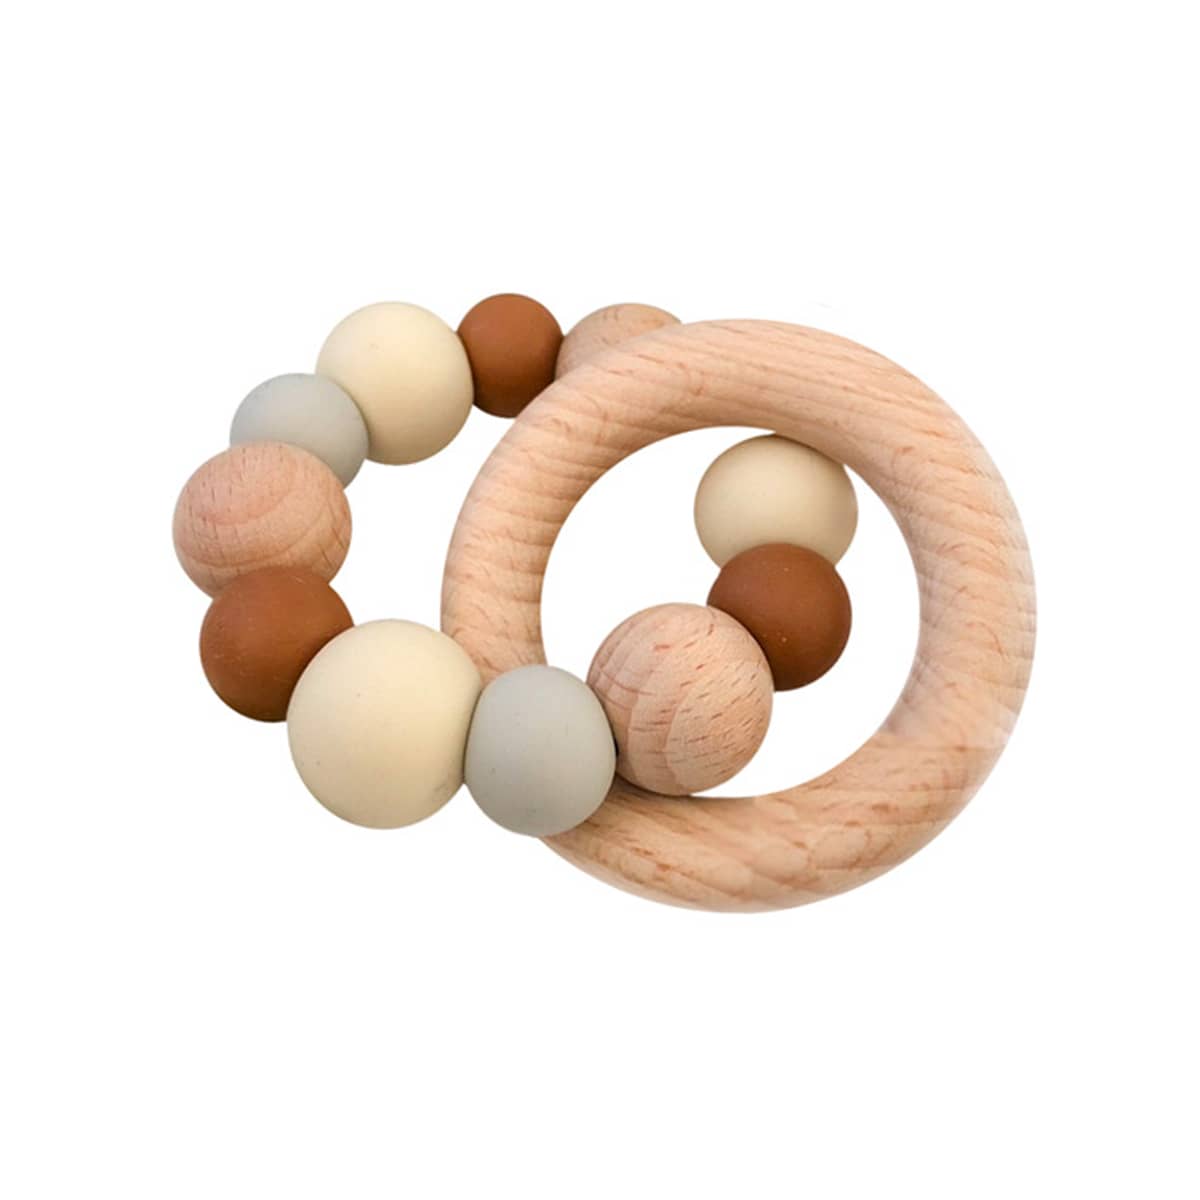 One.Chew.Three Naturals Silicone and Beech Wood Teether - Tan